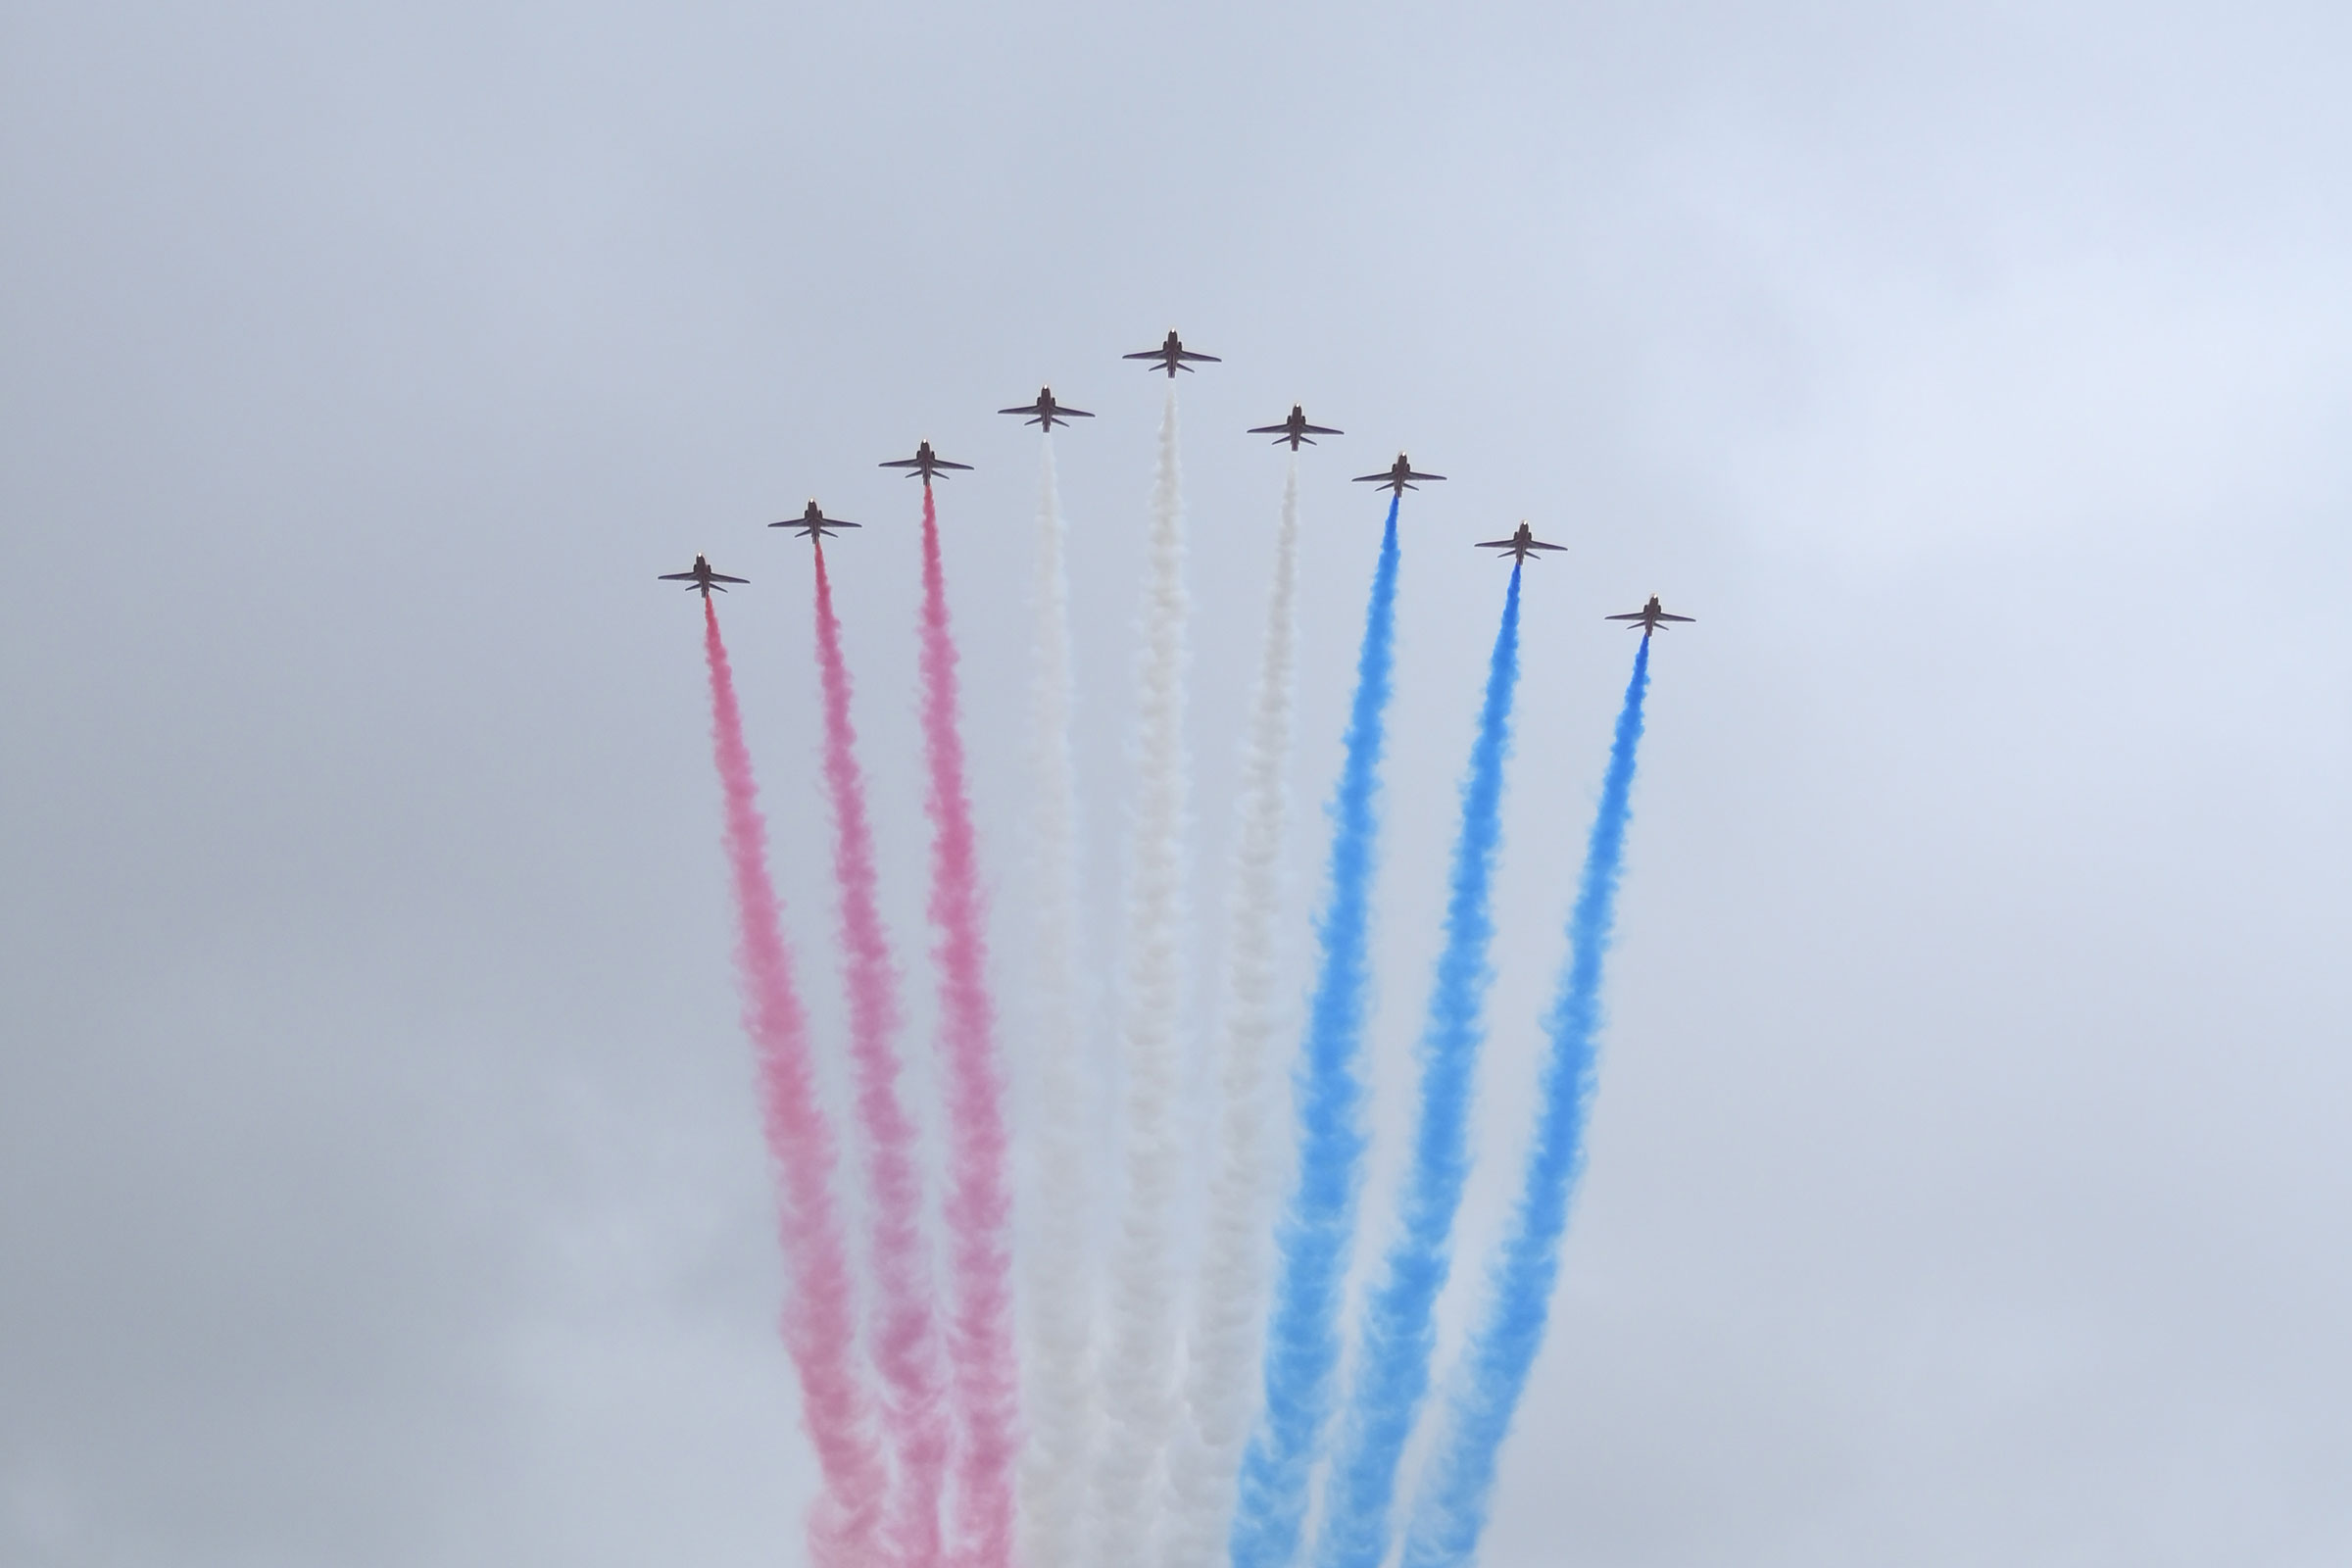 The Royal Air Force Aerobatic Team otherwise known as The Red Arrows fly over The Mall during the Coronation of King Charles III and Queen Camilla.